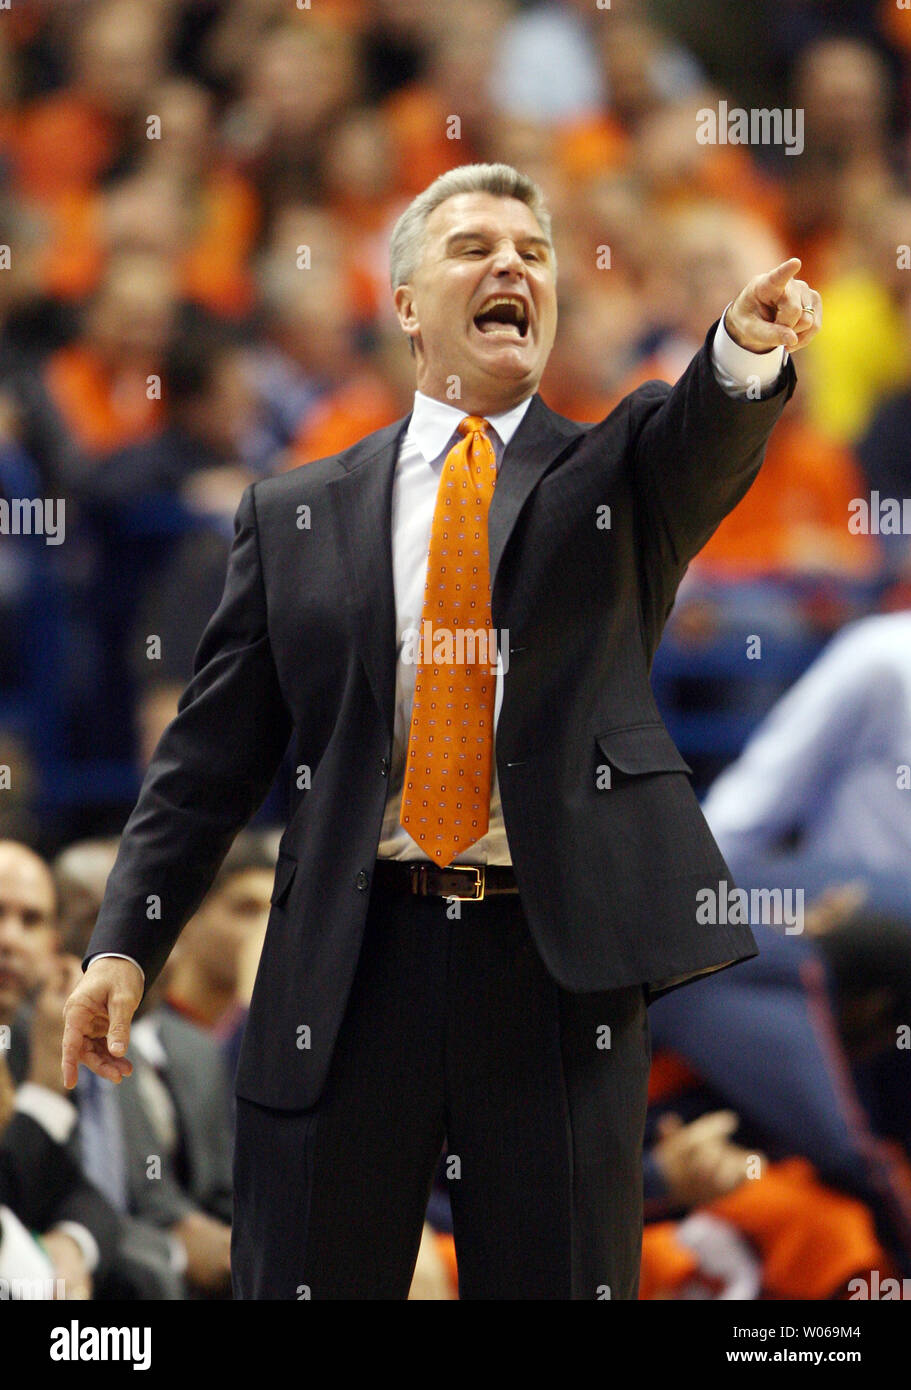 Illinois Fighting Illini's head basketball coach Bruce Weber yells instructions to his players during the first half of the annual Braggin' Rights game against the Missouri Tigers at the Scottrade Center in St. Louis on December 19, 2006.     (UPI Photo/Bill Greenblatt) Stock Photo